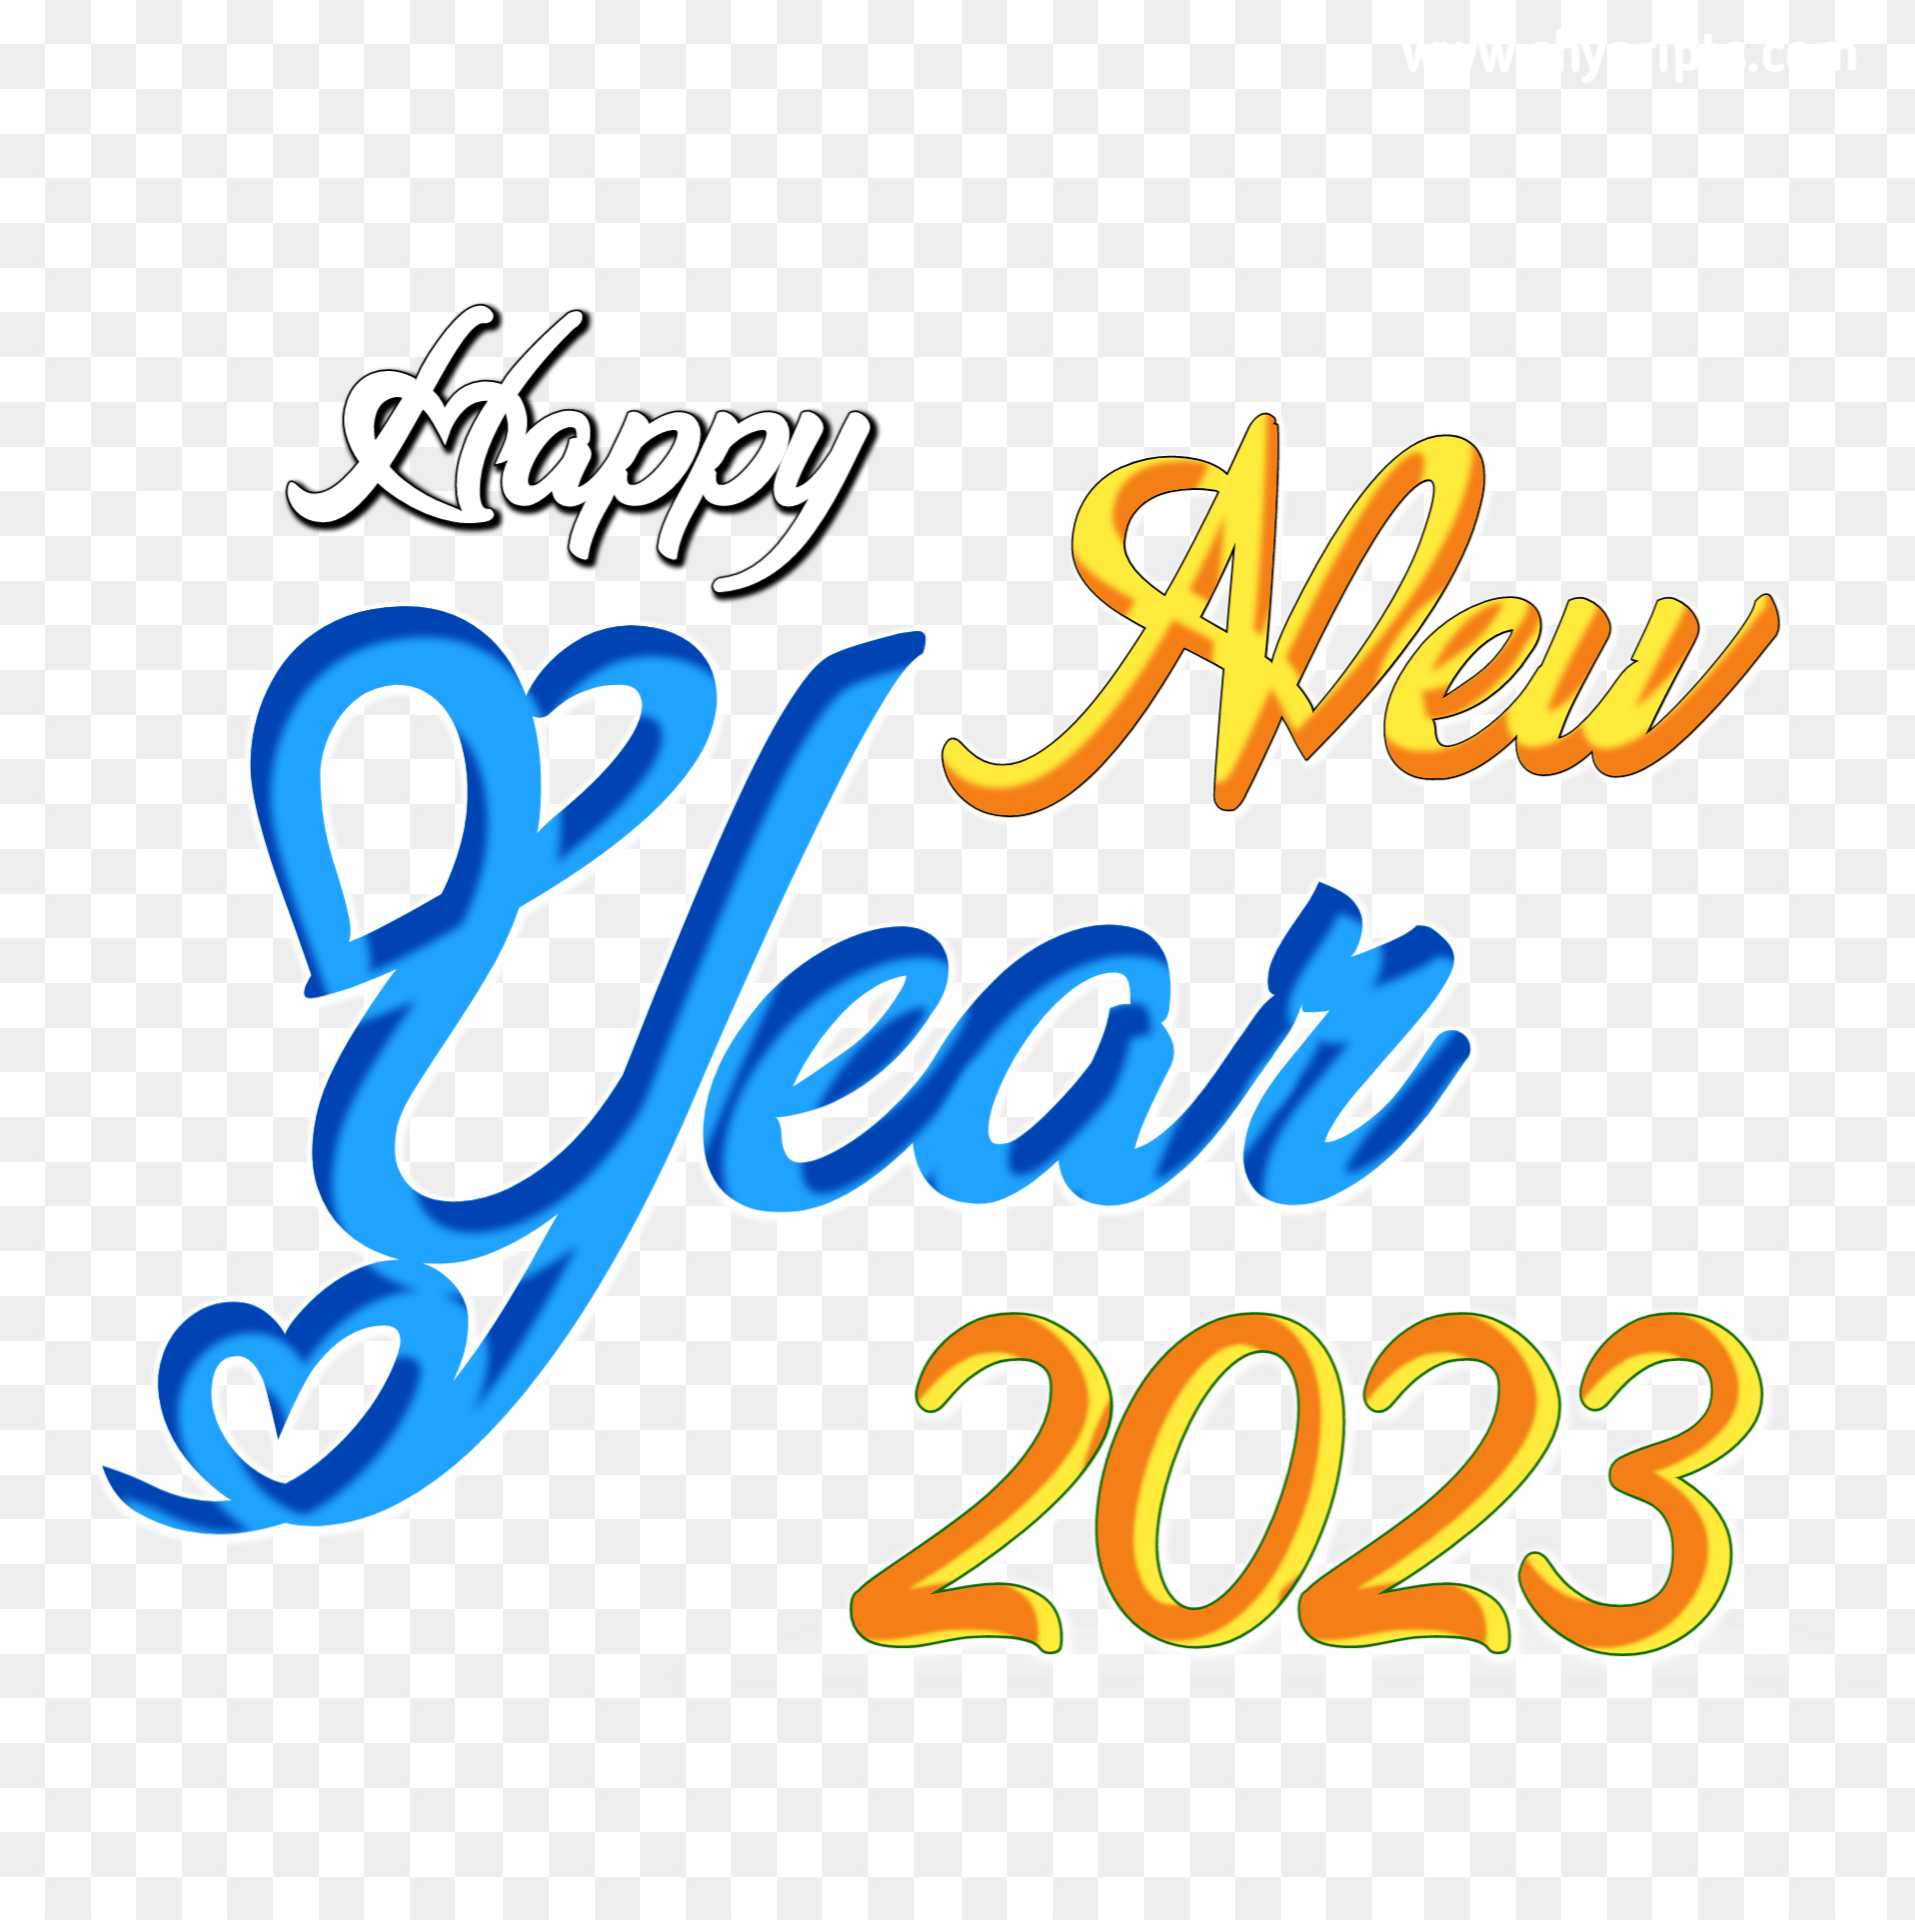 Happy New year 2023 PNG download 